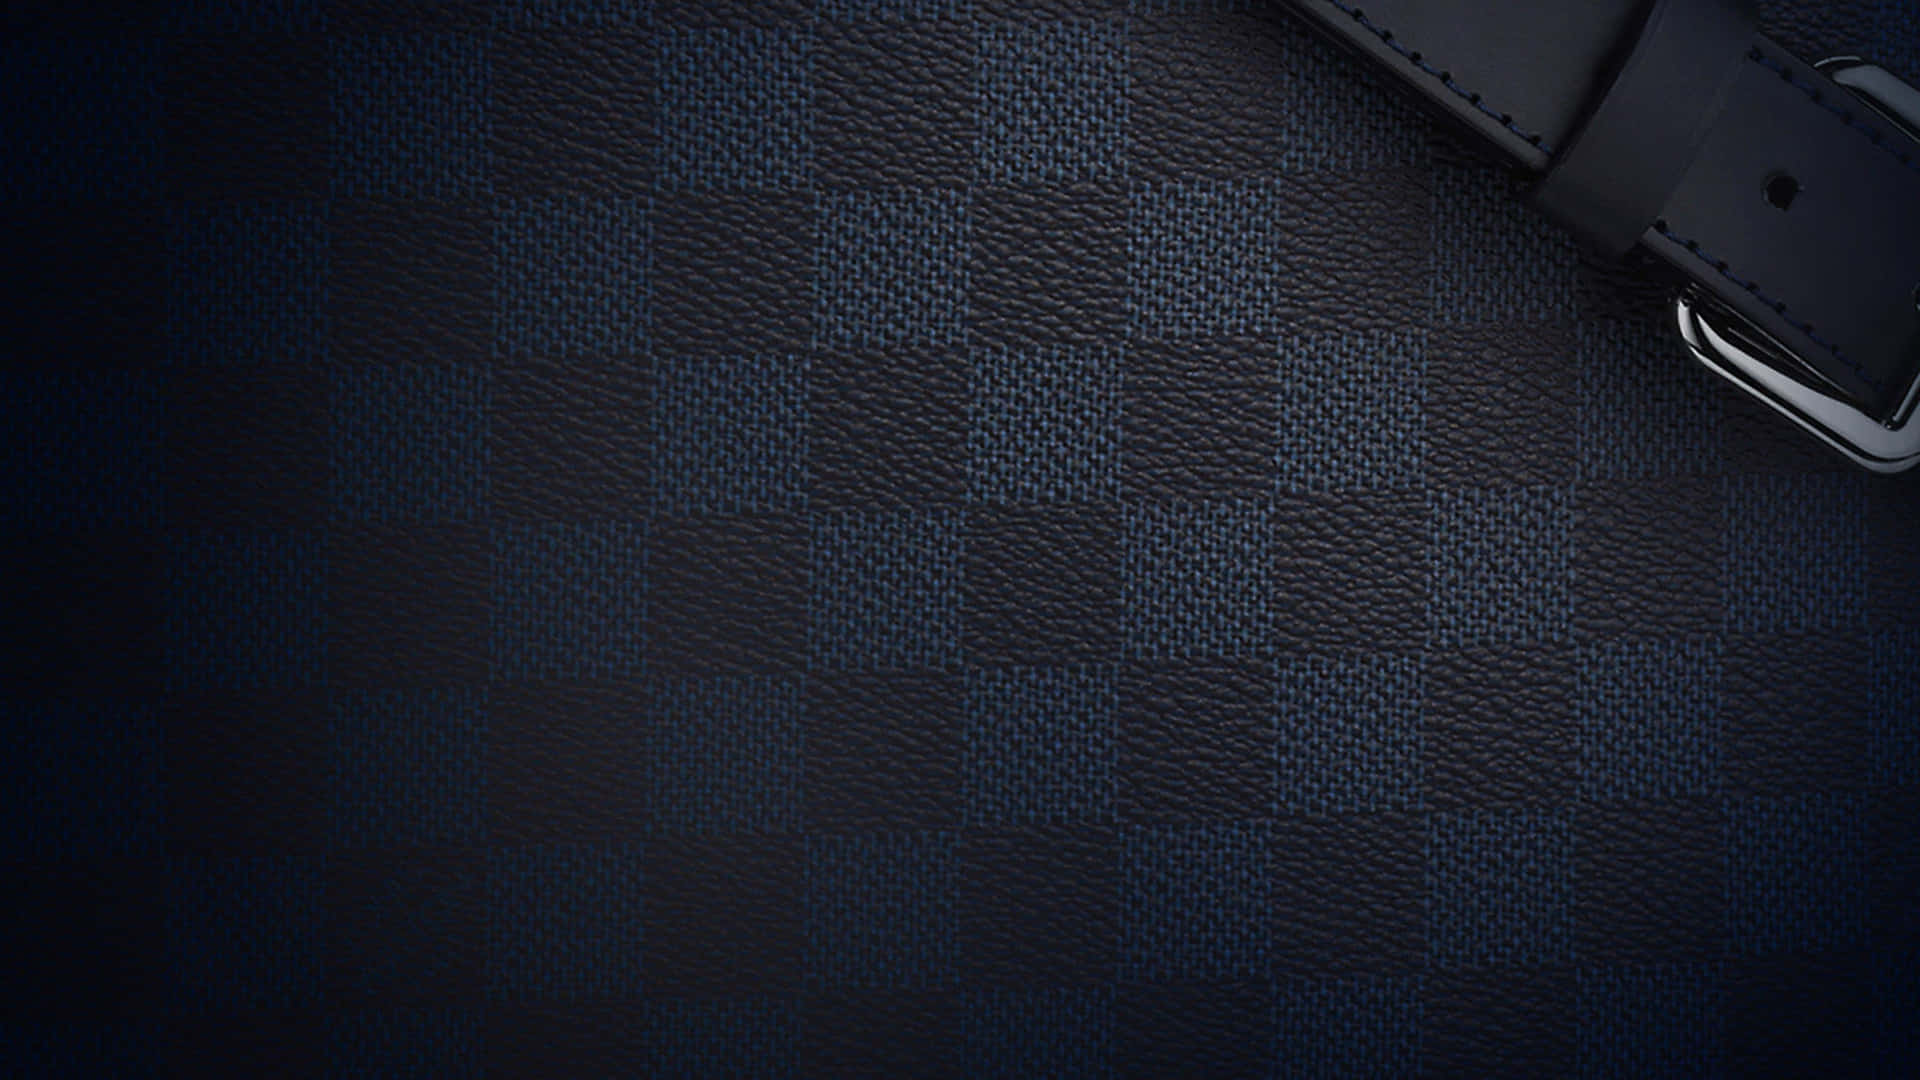 Download Experience the luxury of Louis Vuitton with this beautiful 4K  wallpaper Wallpaper